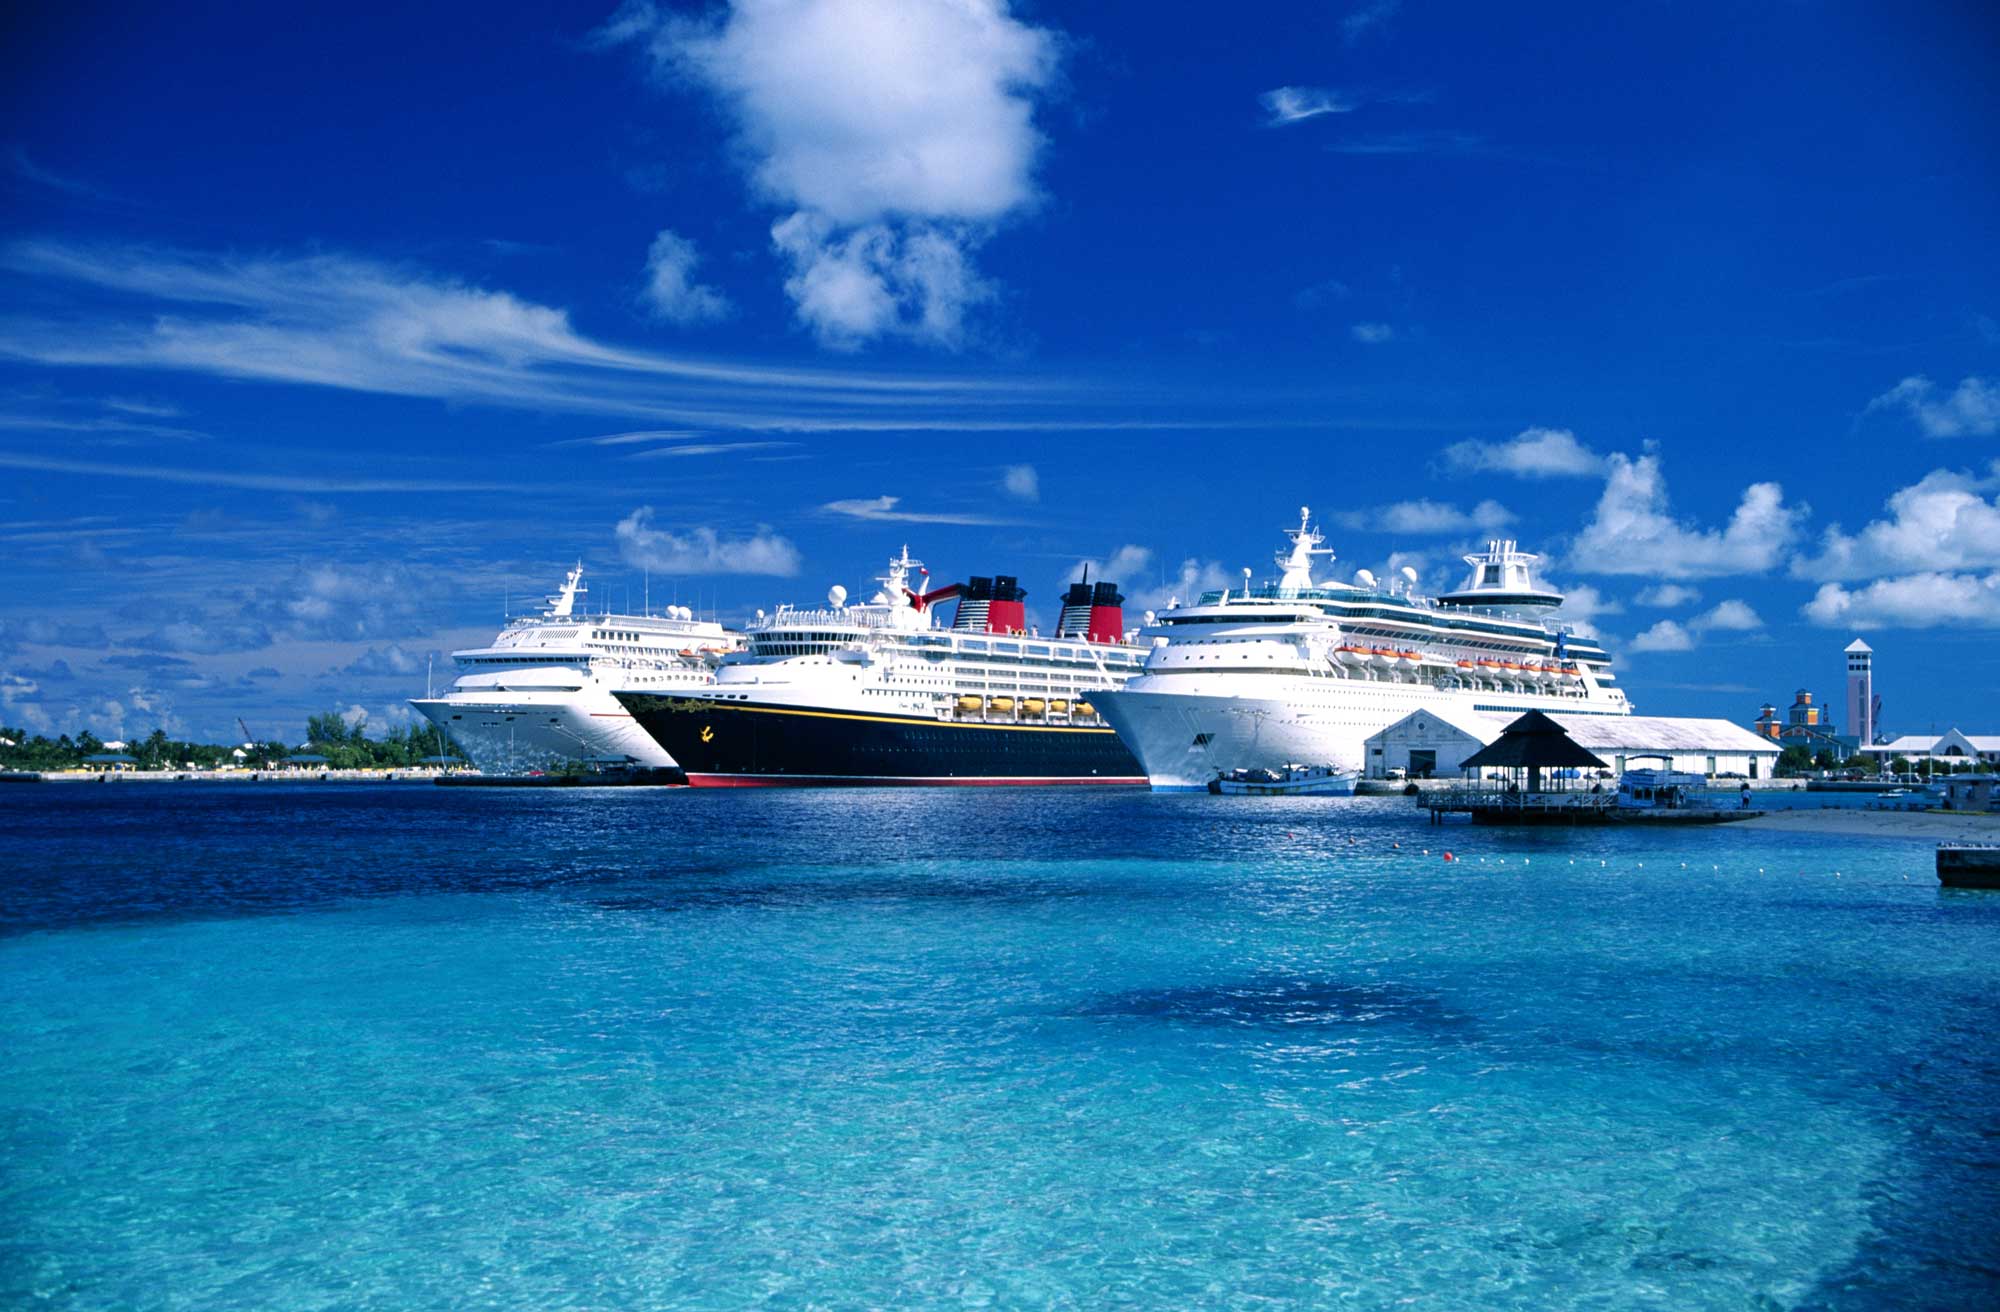 Plan your cruise with Classic Travel Agency